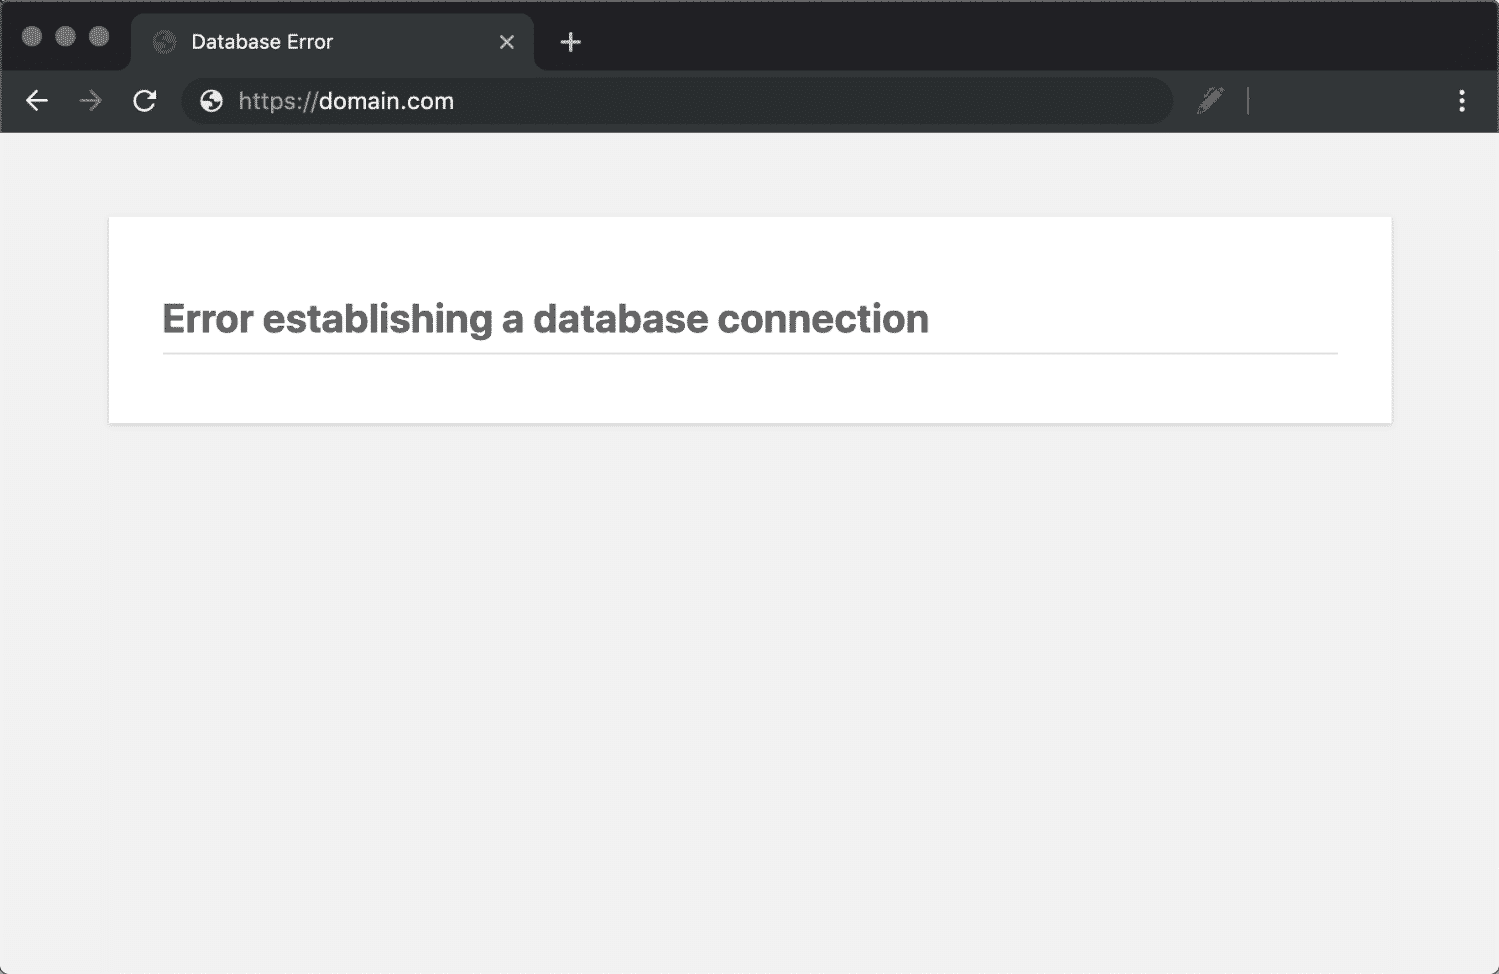 The Error establishing a database connection message in Chrome.